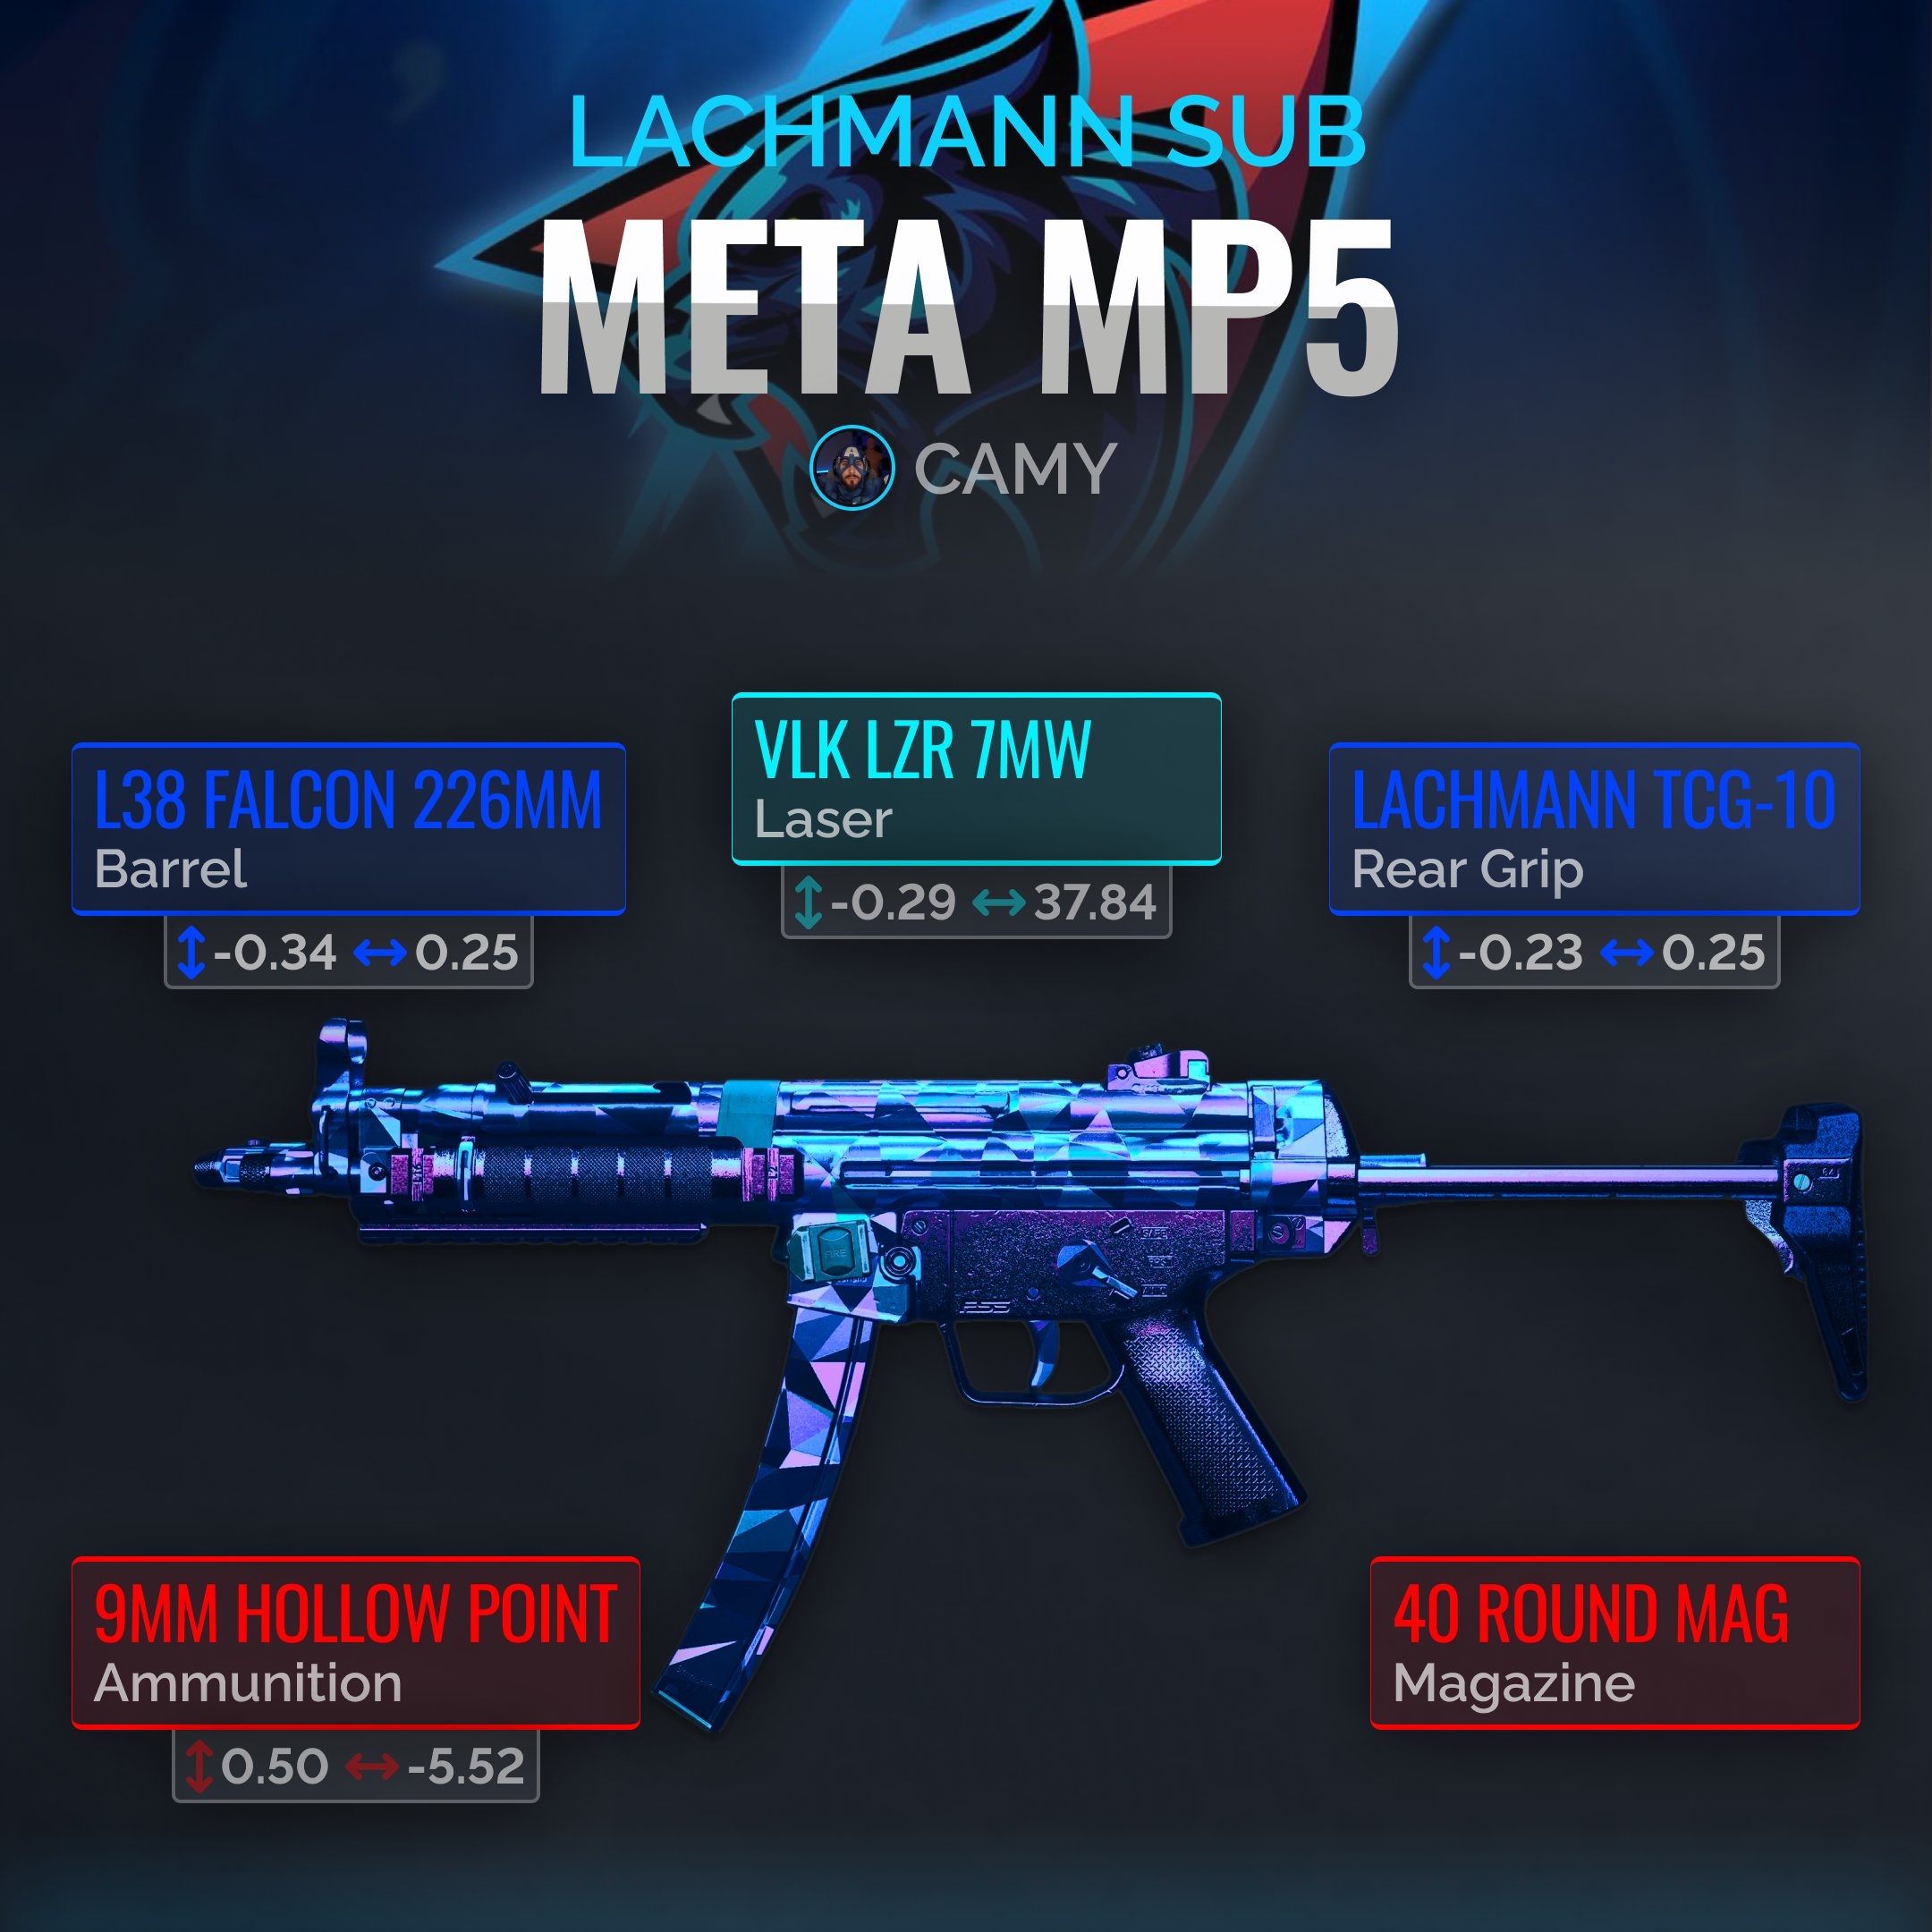 Warzone Meta on X: ‼️#1 FAST TTK LOADOUT IN WARZONE‼️ 🥇The